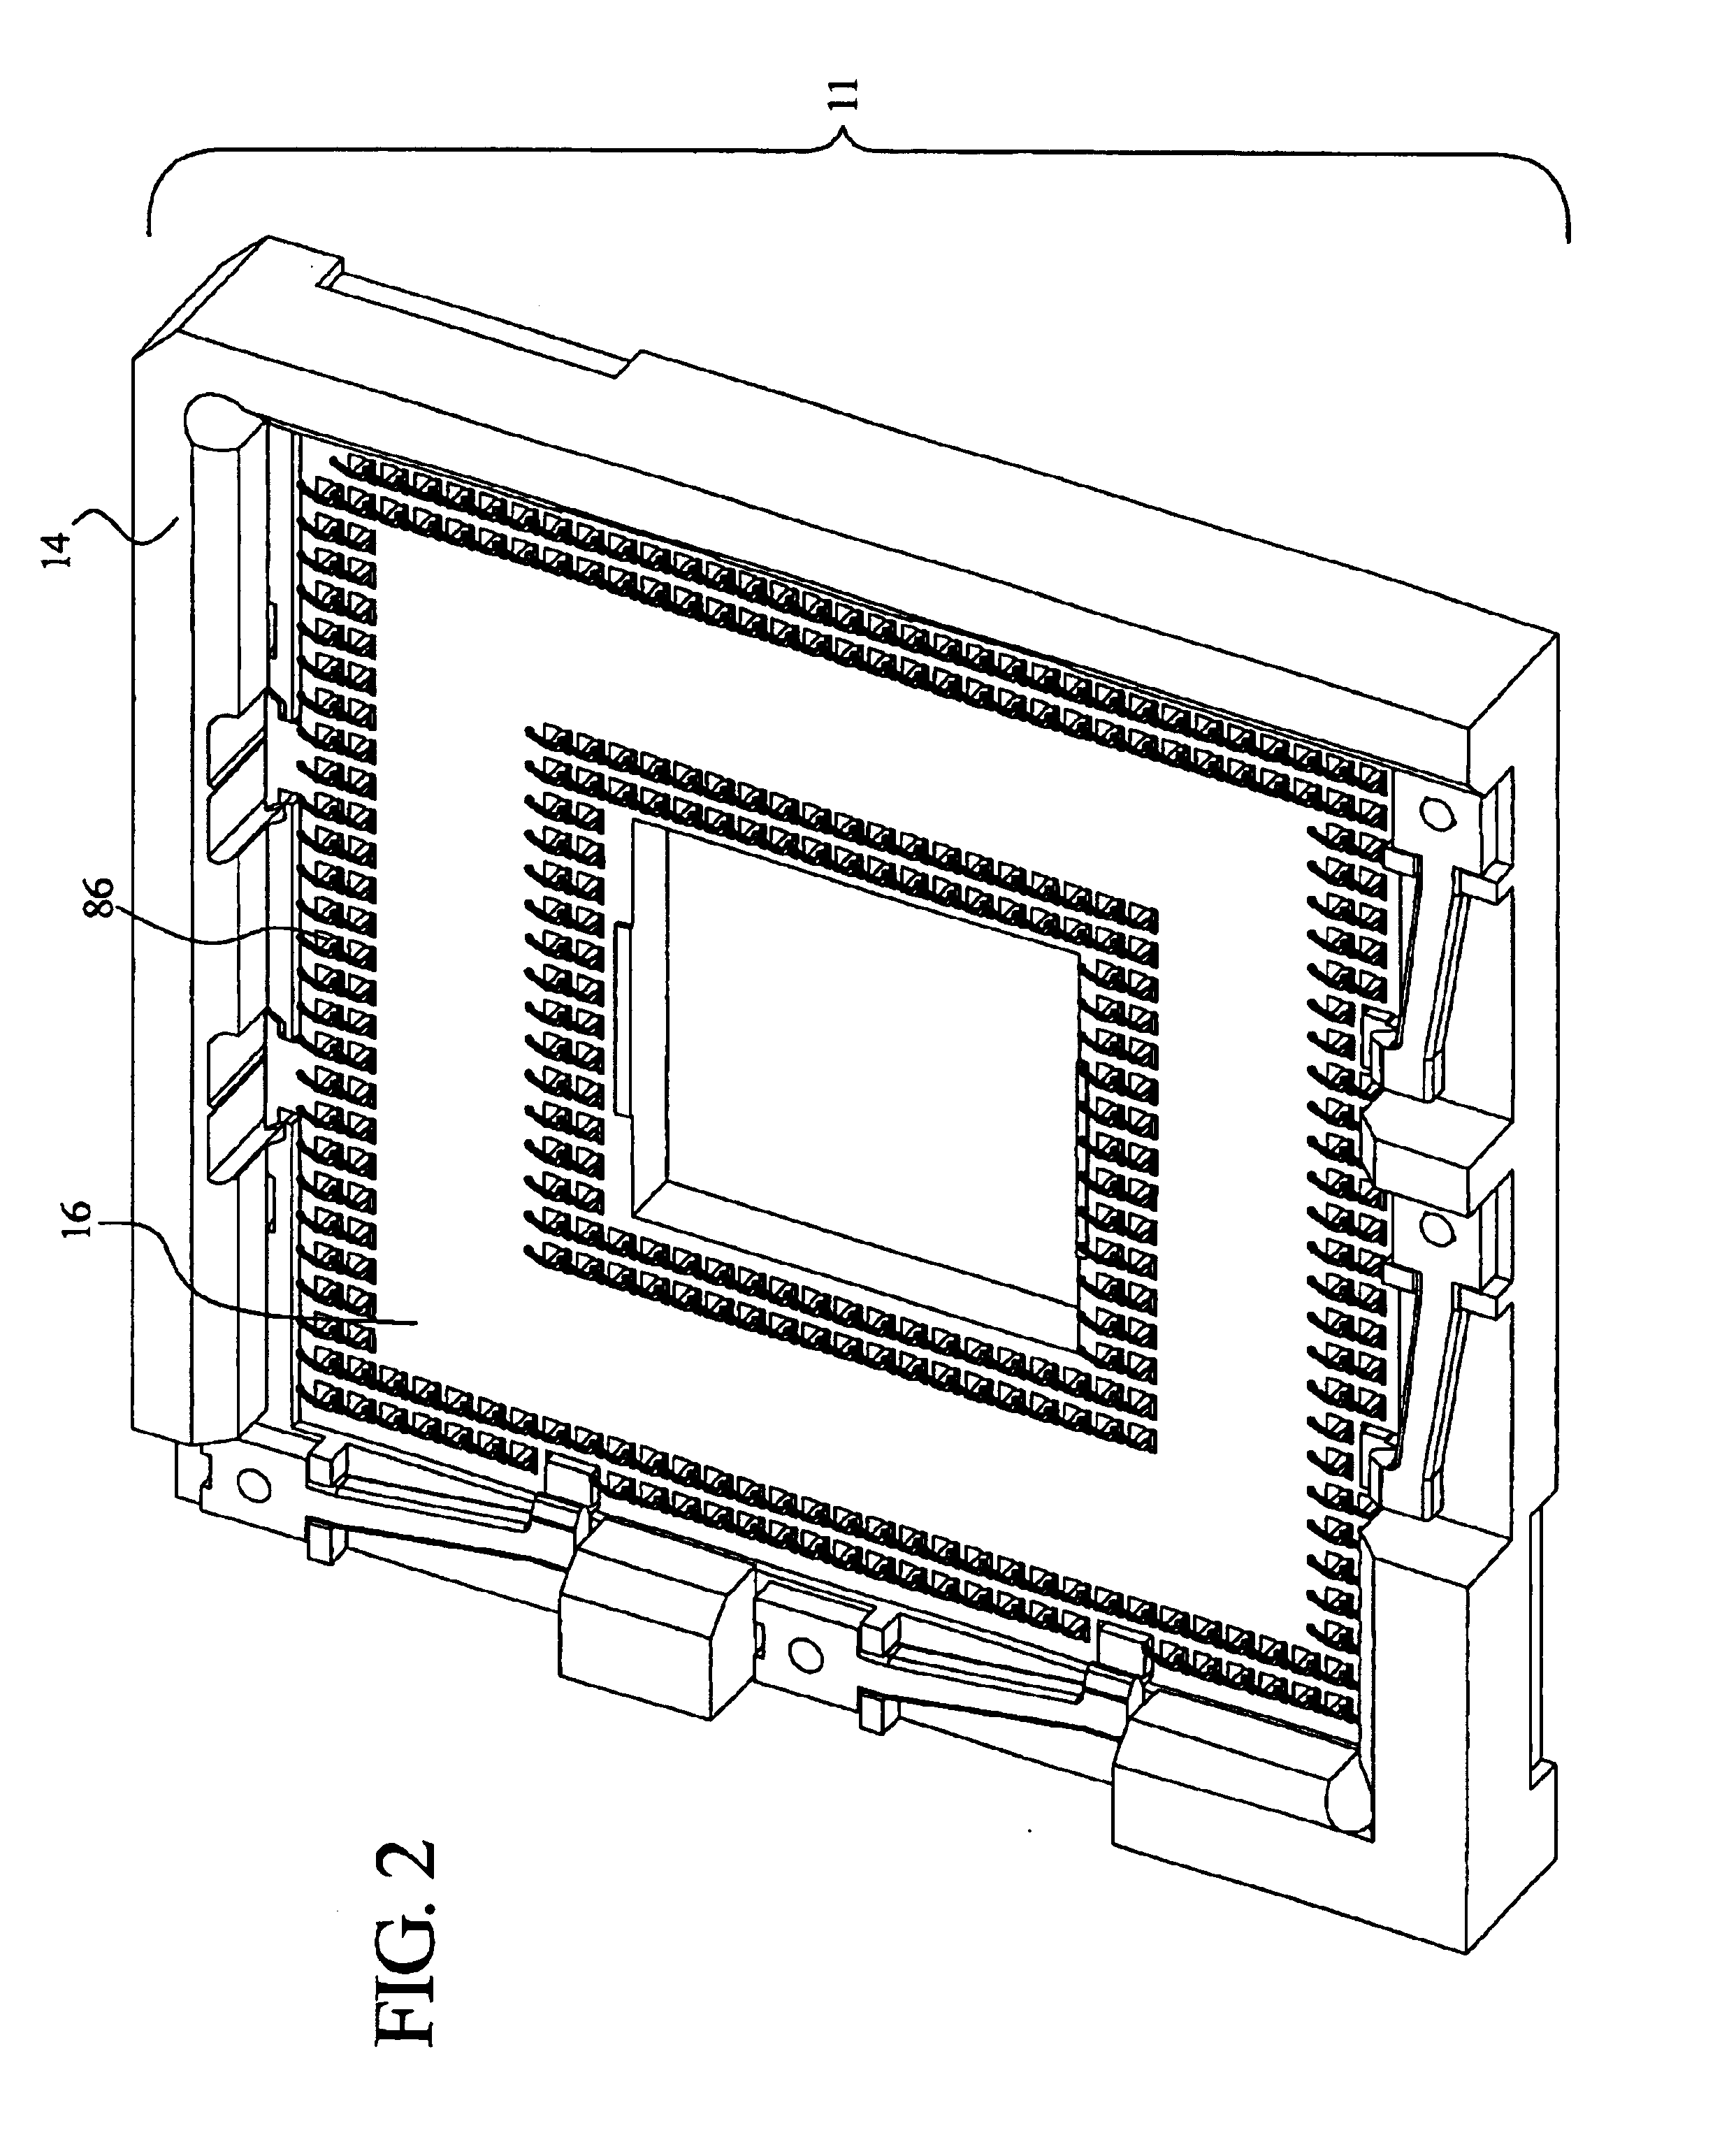 Contact for land grid array socket